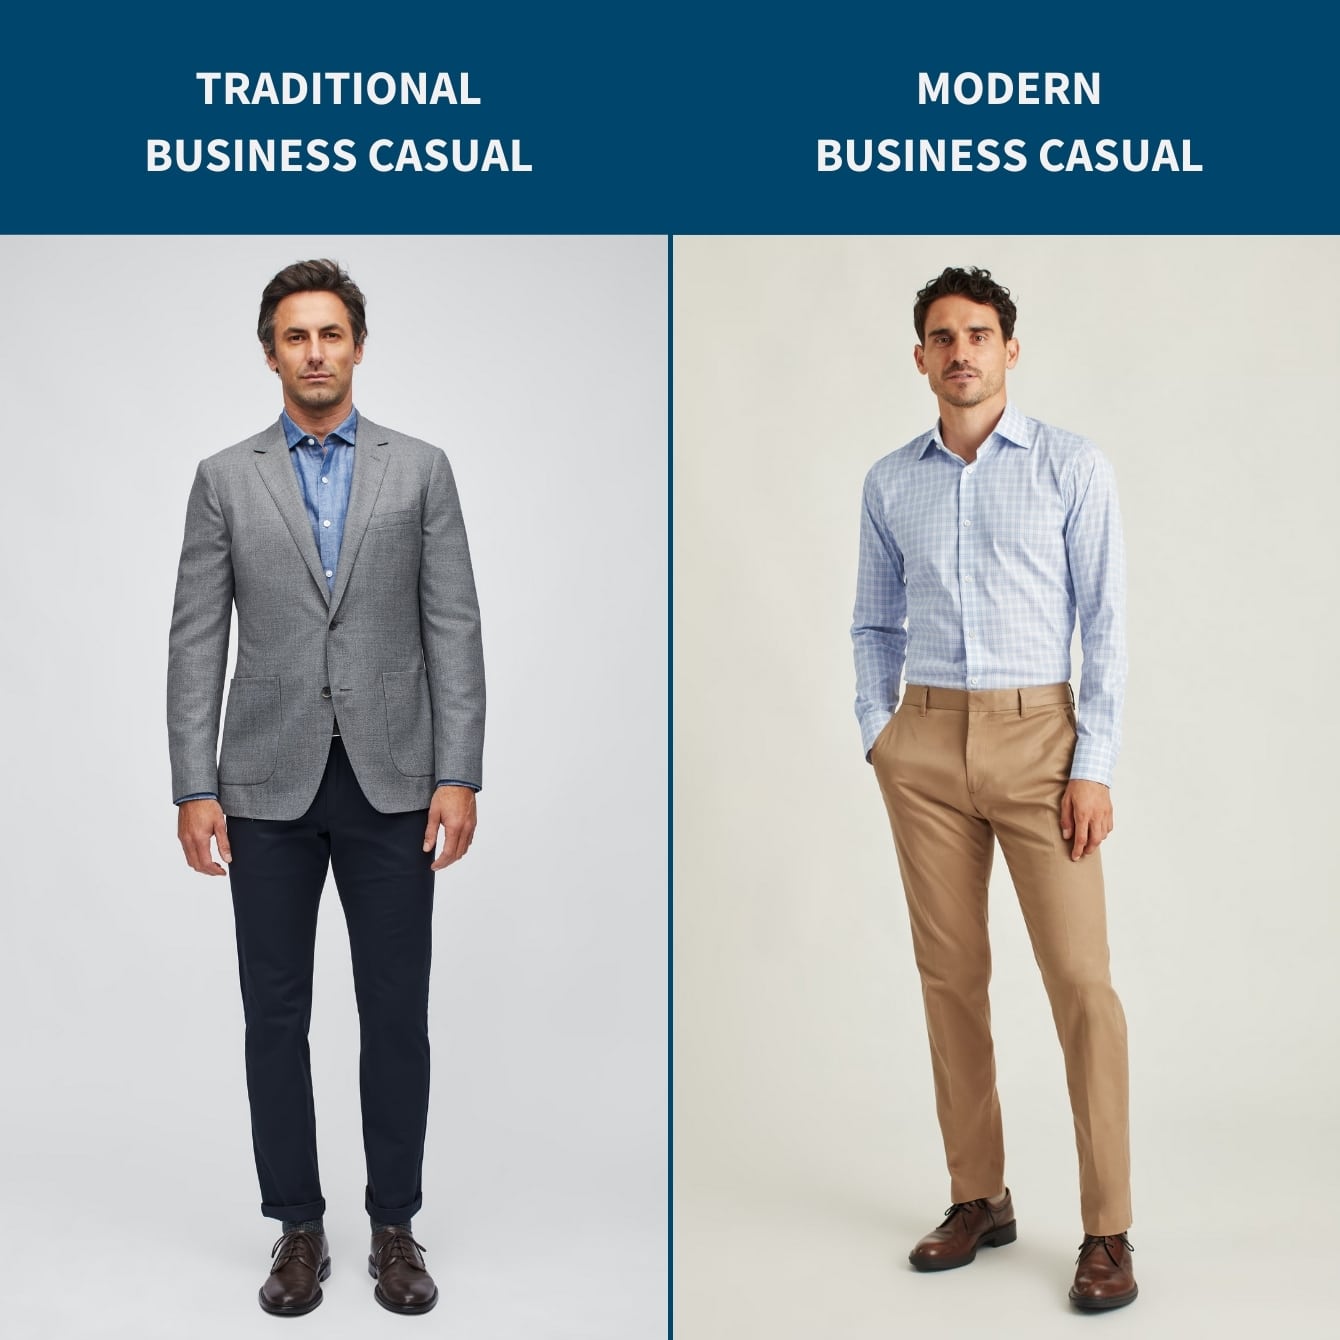 Modern business casual style